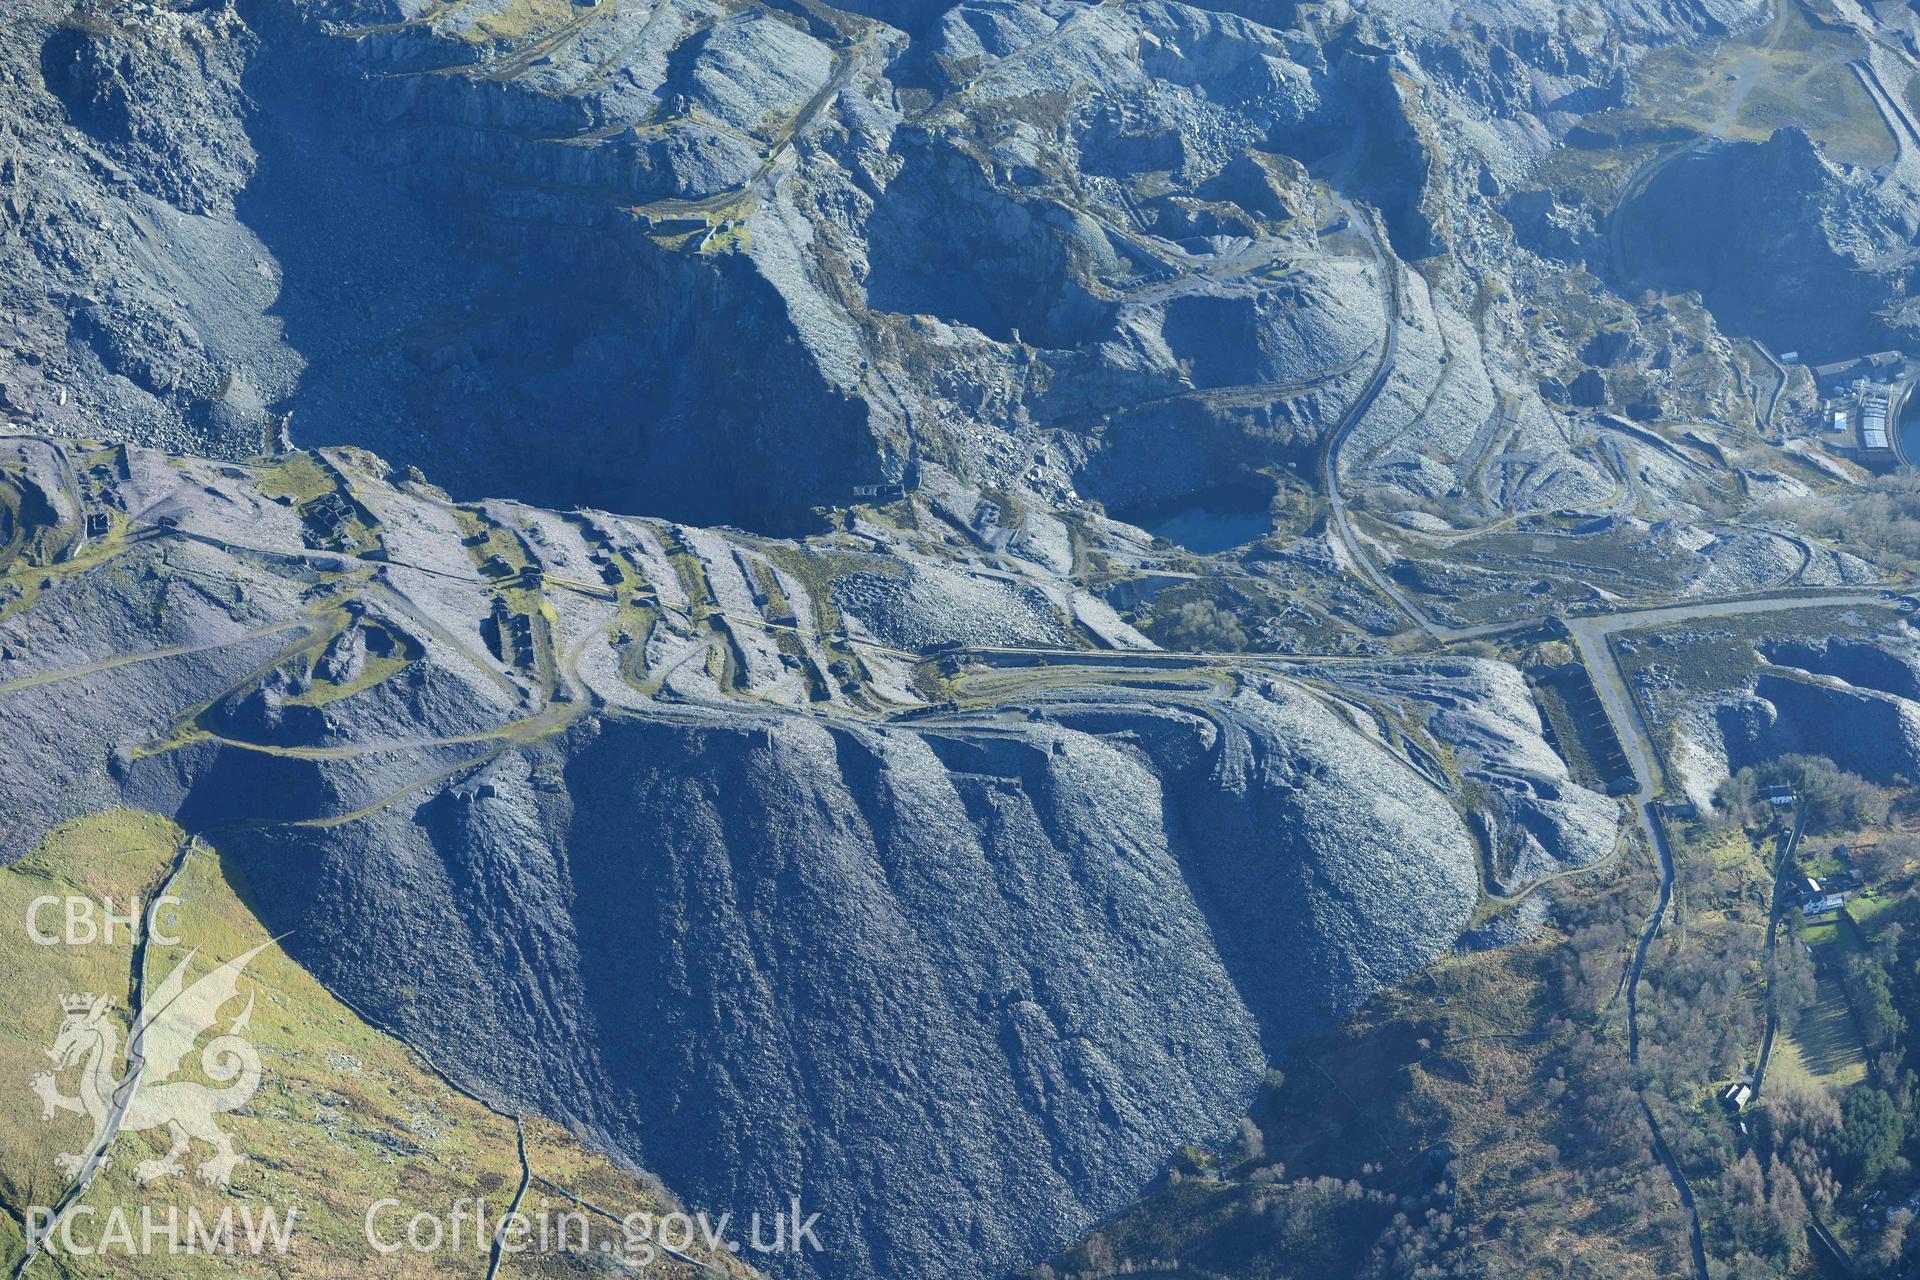 Oblique aerial photograph of Dinorwic Slate Quarry and Pass of Llanberis, taken from the north during the Royal Commission